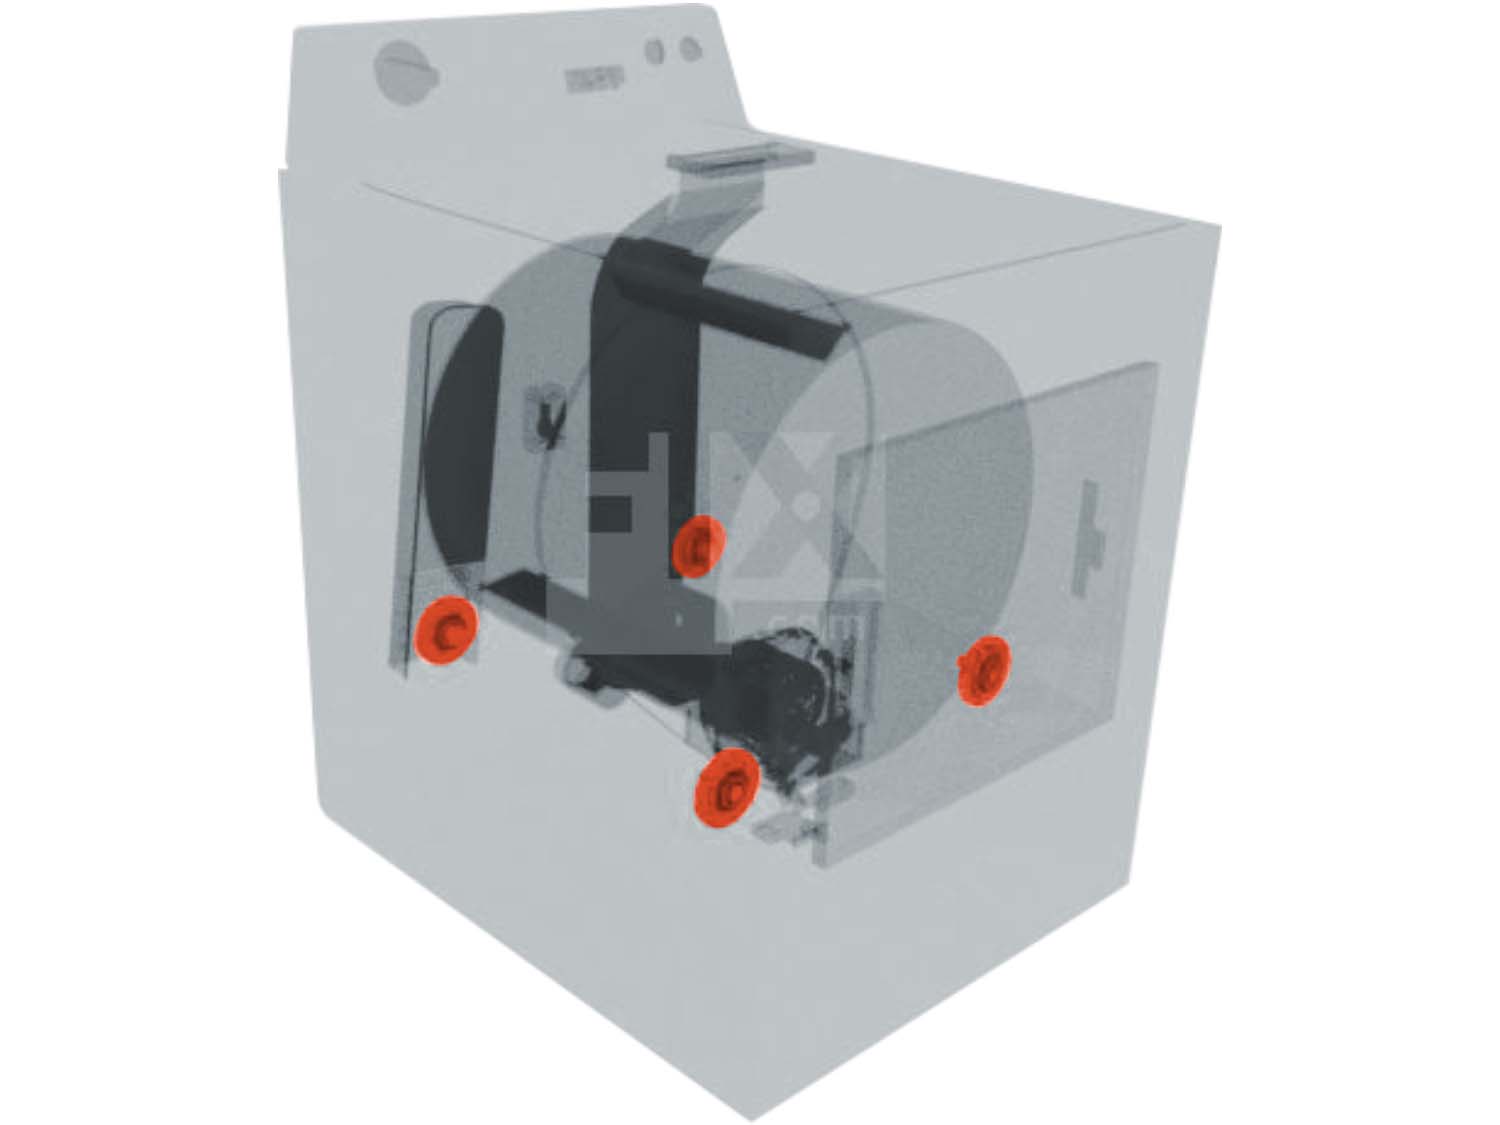 A 3D diagram showing the components of a dryer and specifying the location of the drum rollers